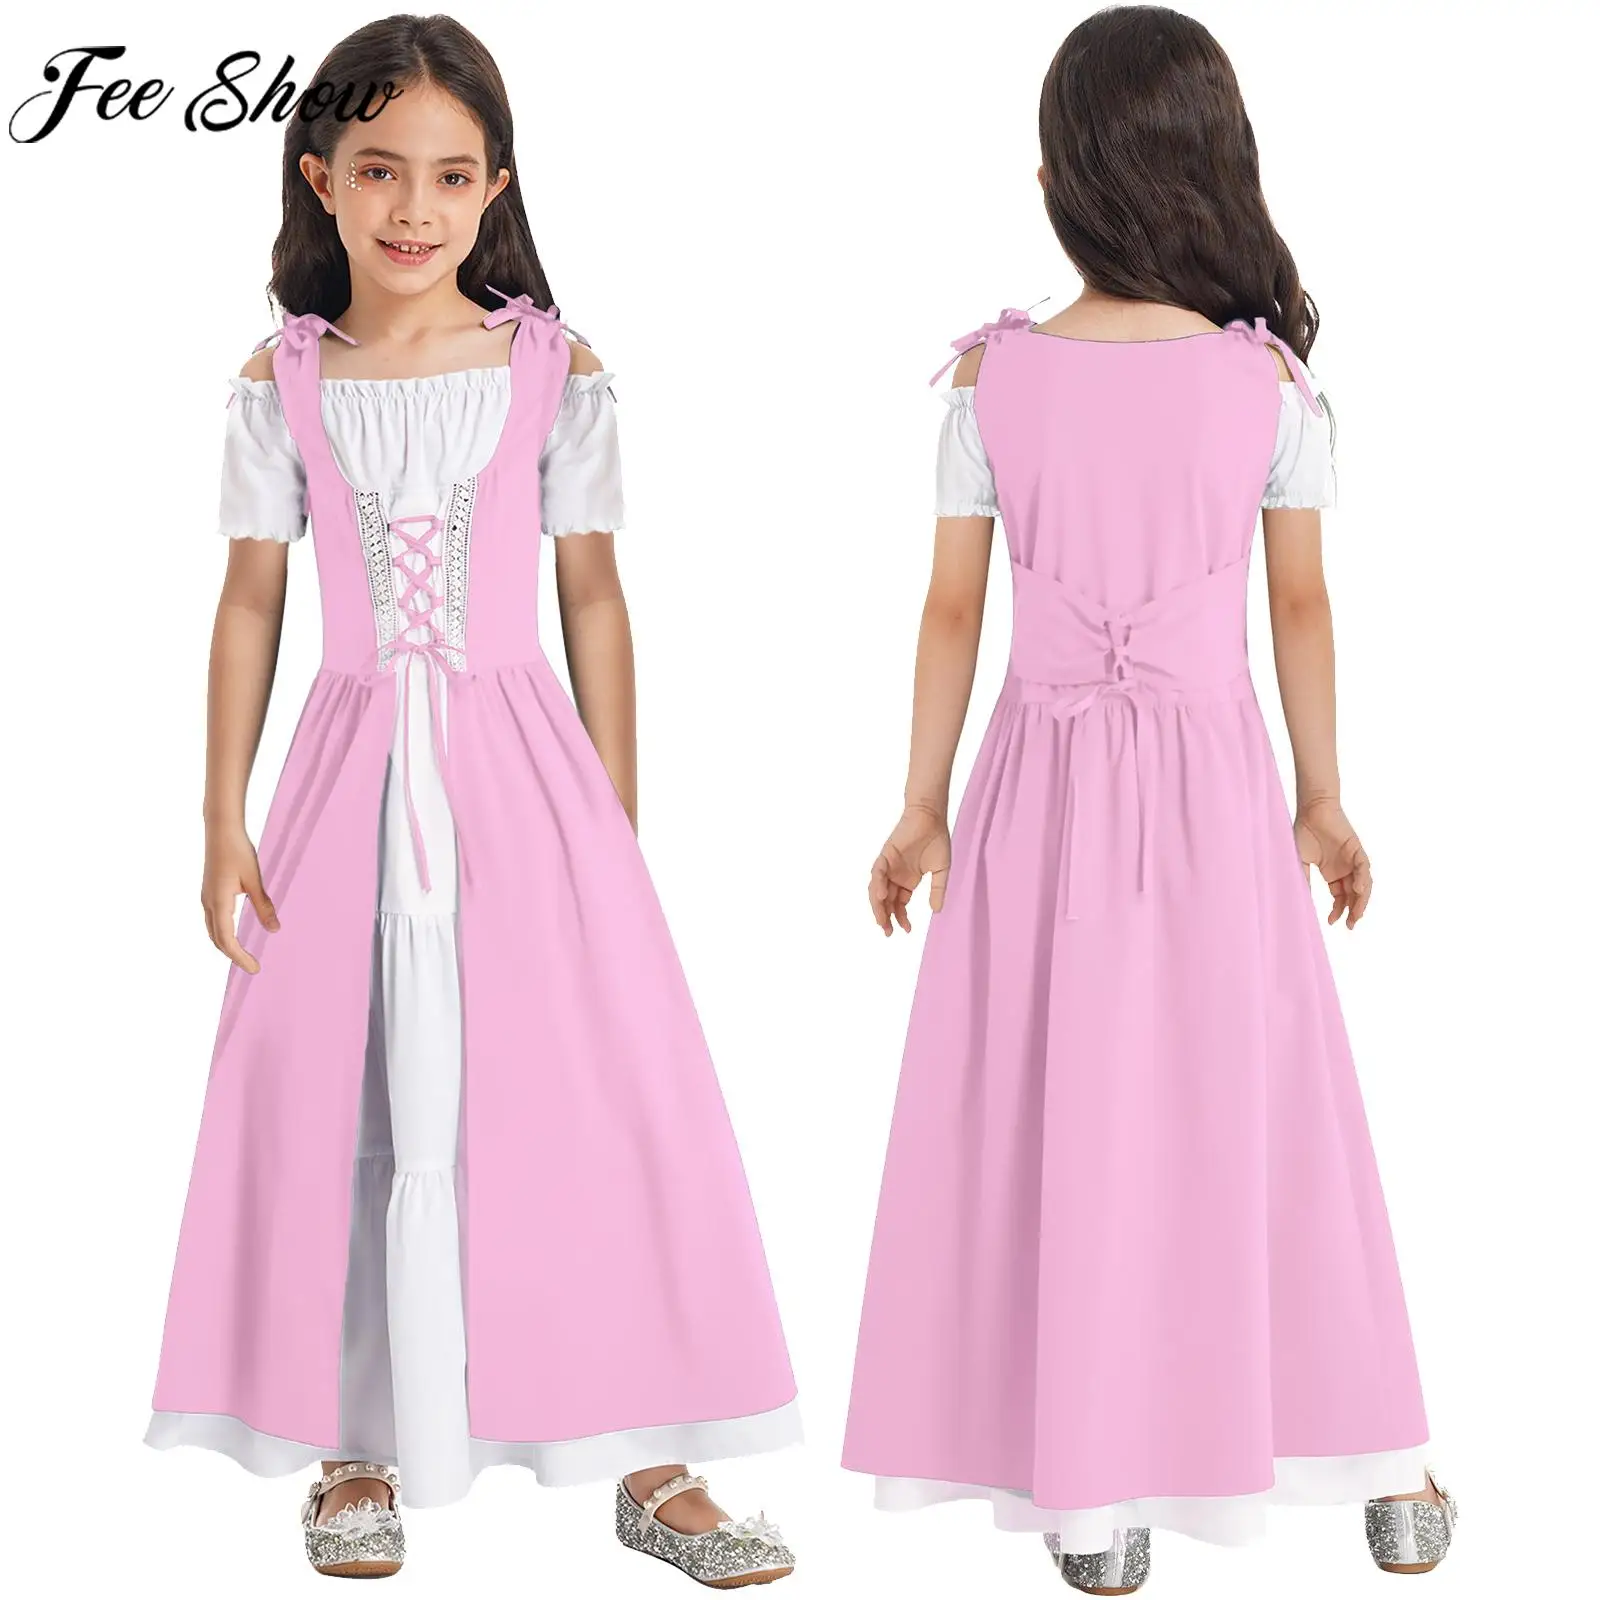 

Kids Girls Medieval Renaissance Victorian Dress Halloween Theme Party Carnival Cosplay Costume Short Sleeve Lace-up Robe Gown